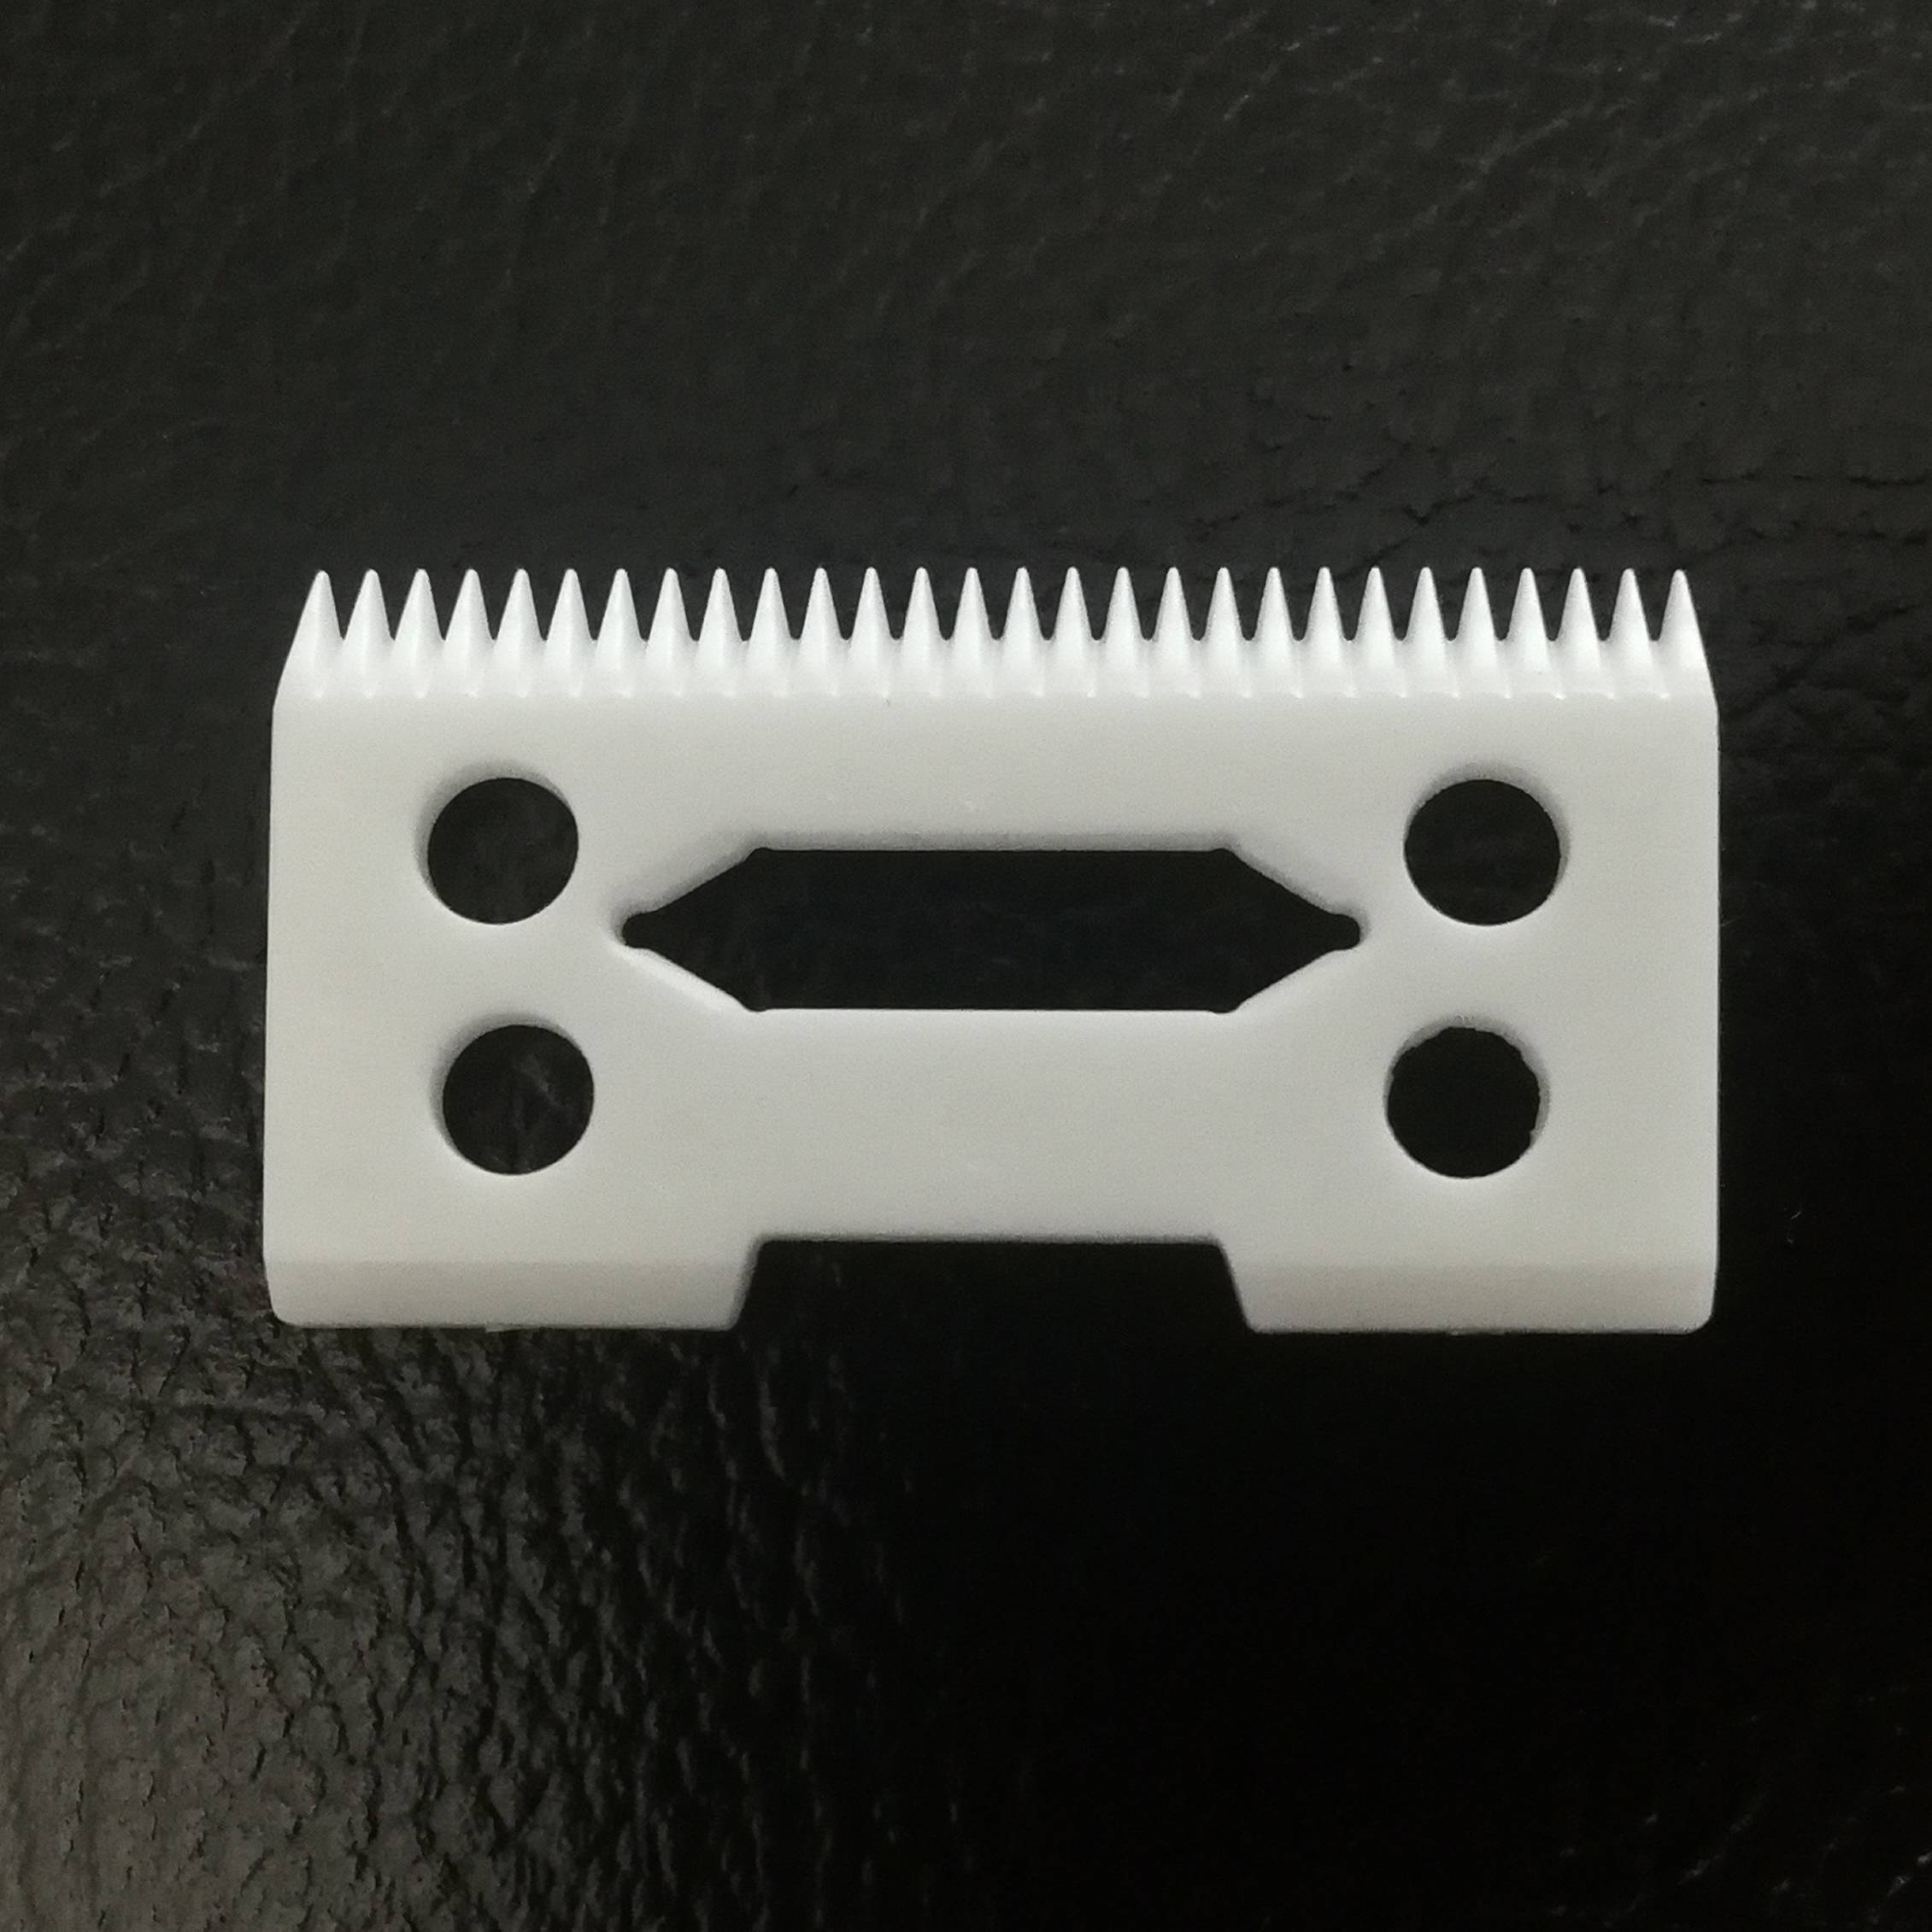 Chinese Professional Trimmer Blade Ceramic - 28teeth for Wahl Sirreepet